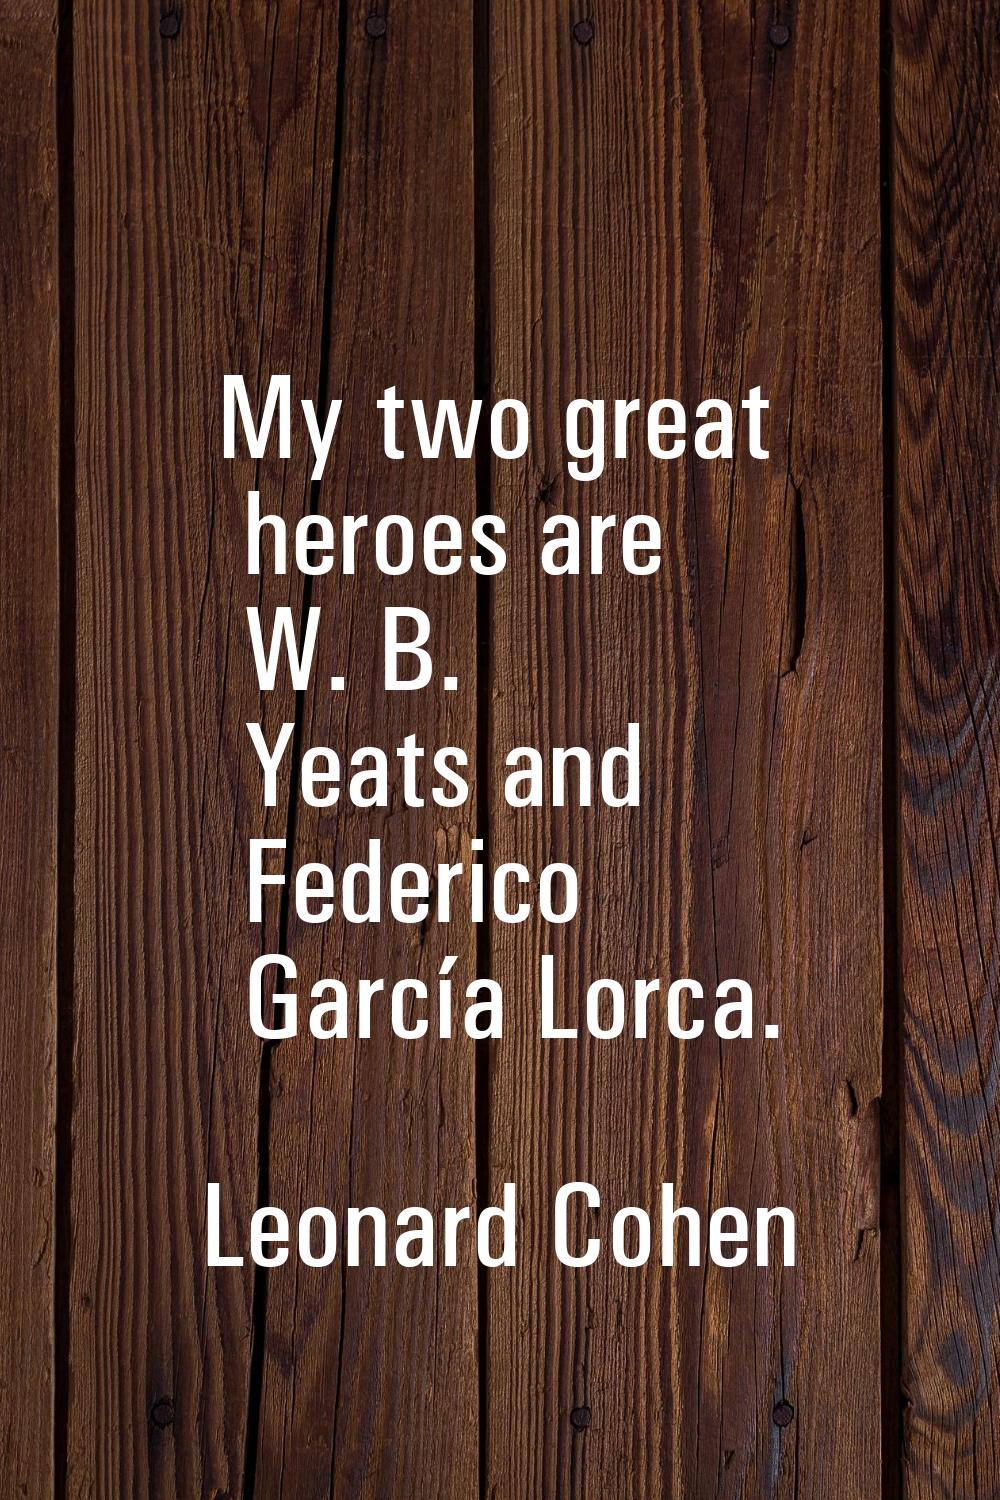 My two great heroes are W. B. Yeats and Federico García Lorca.